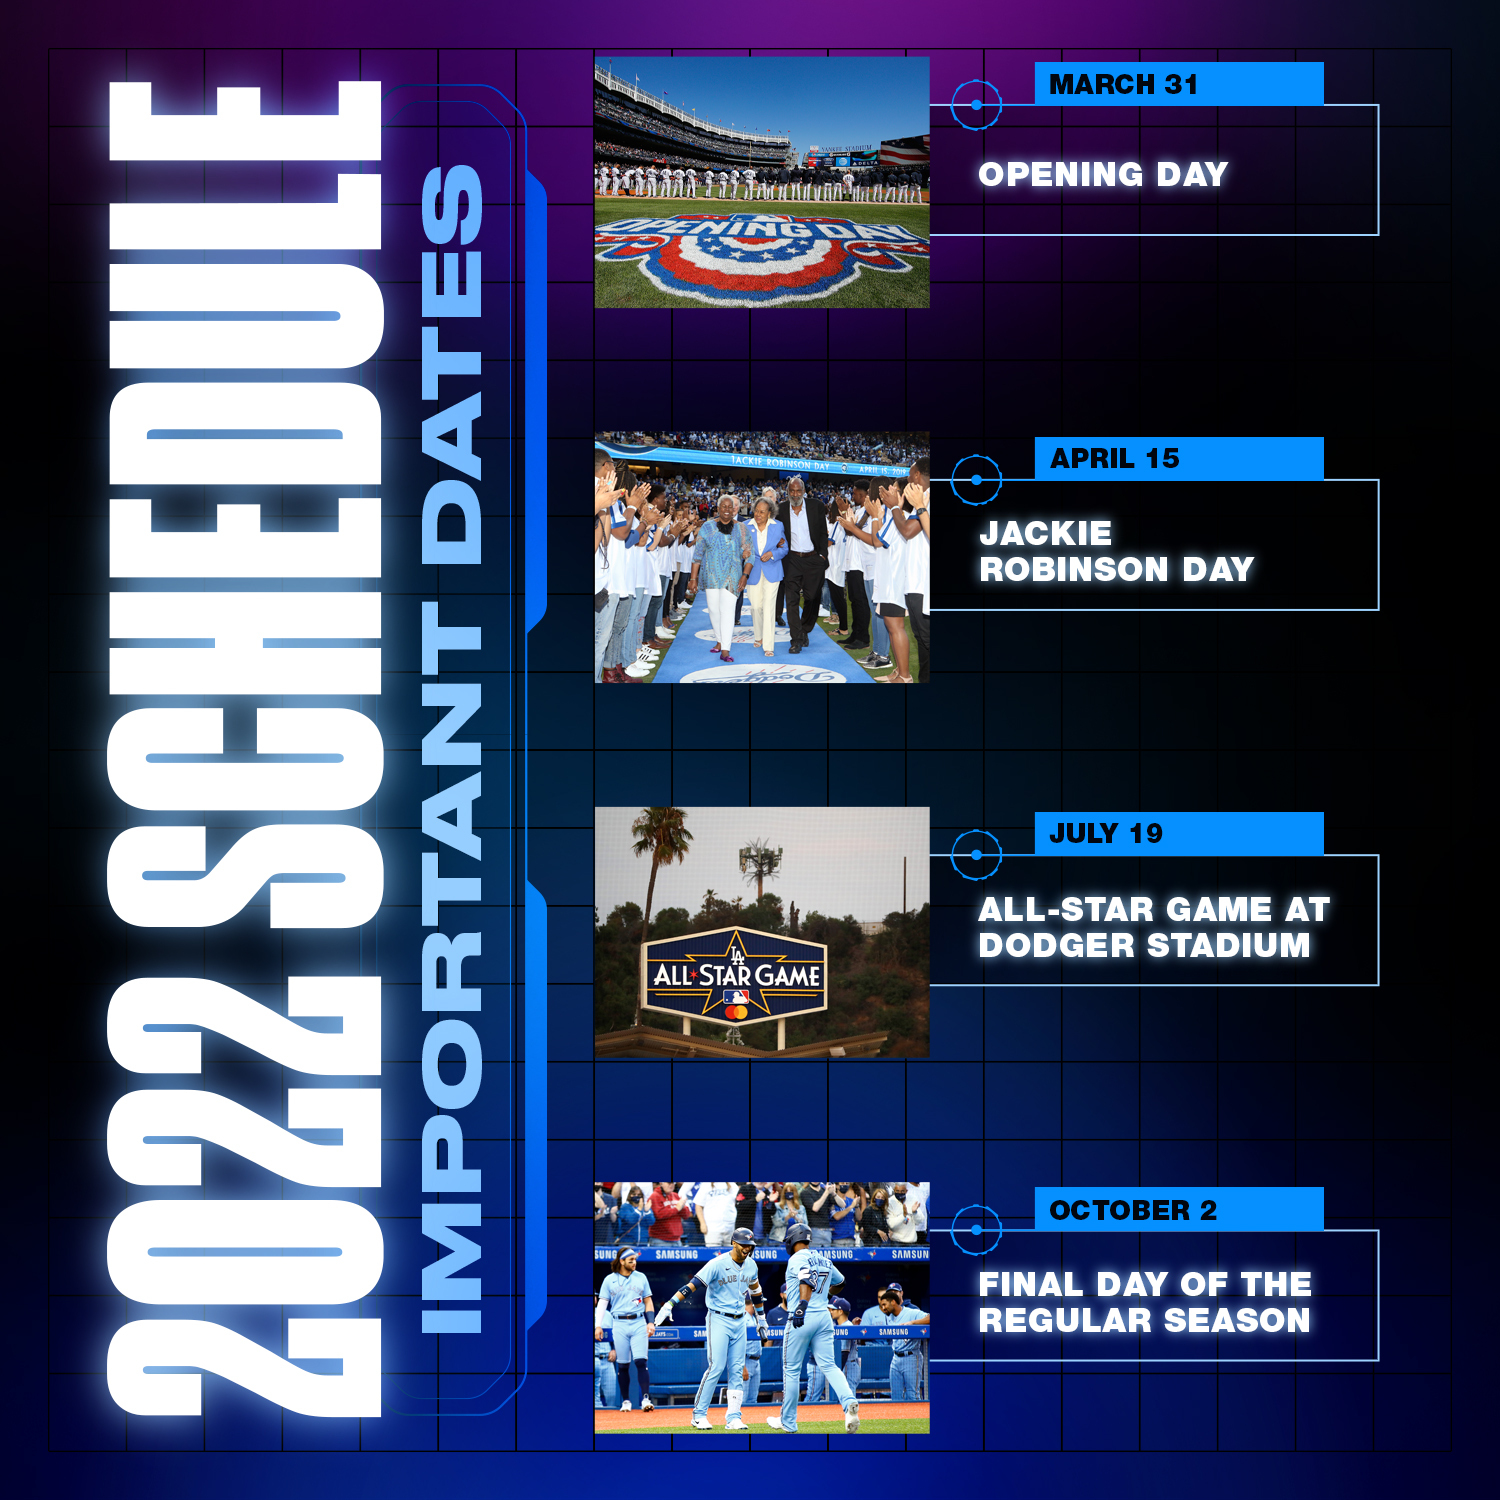 Mlb Schedule 2022 Release Date Mlb On Twitter: "The 2022 Schedule Is Out! Mark Your Calendar Accordingly.  ⬇️ Https://T.co/By19Zgwwbu" / Twitter